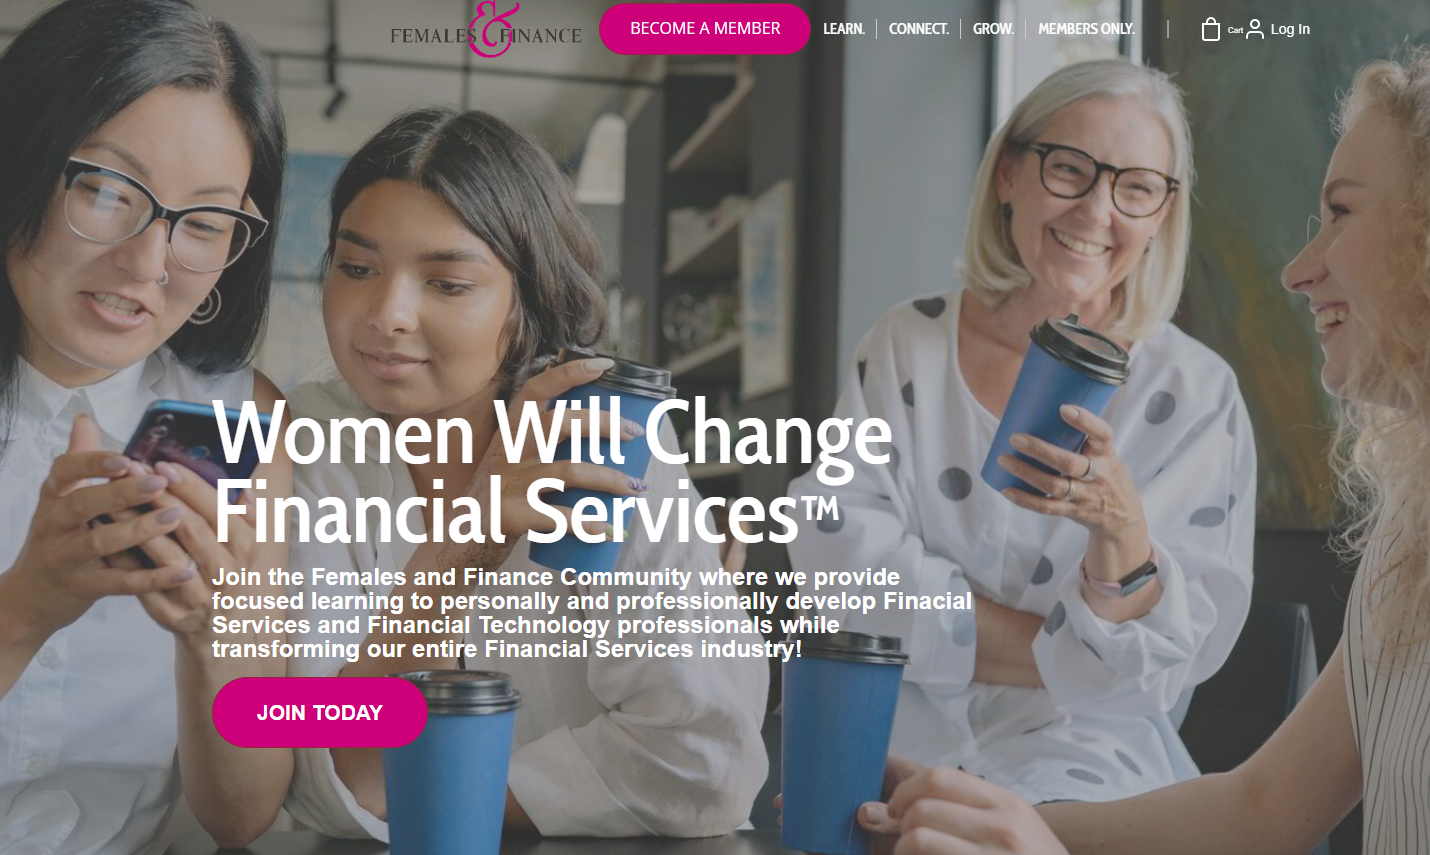 Females and Finance | Home Page